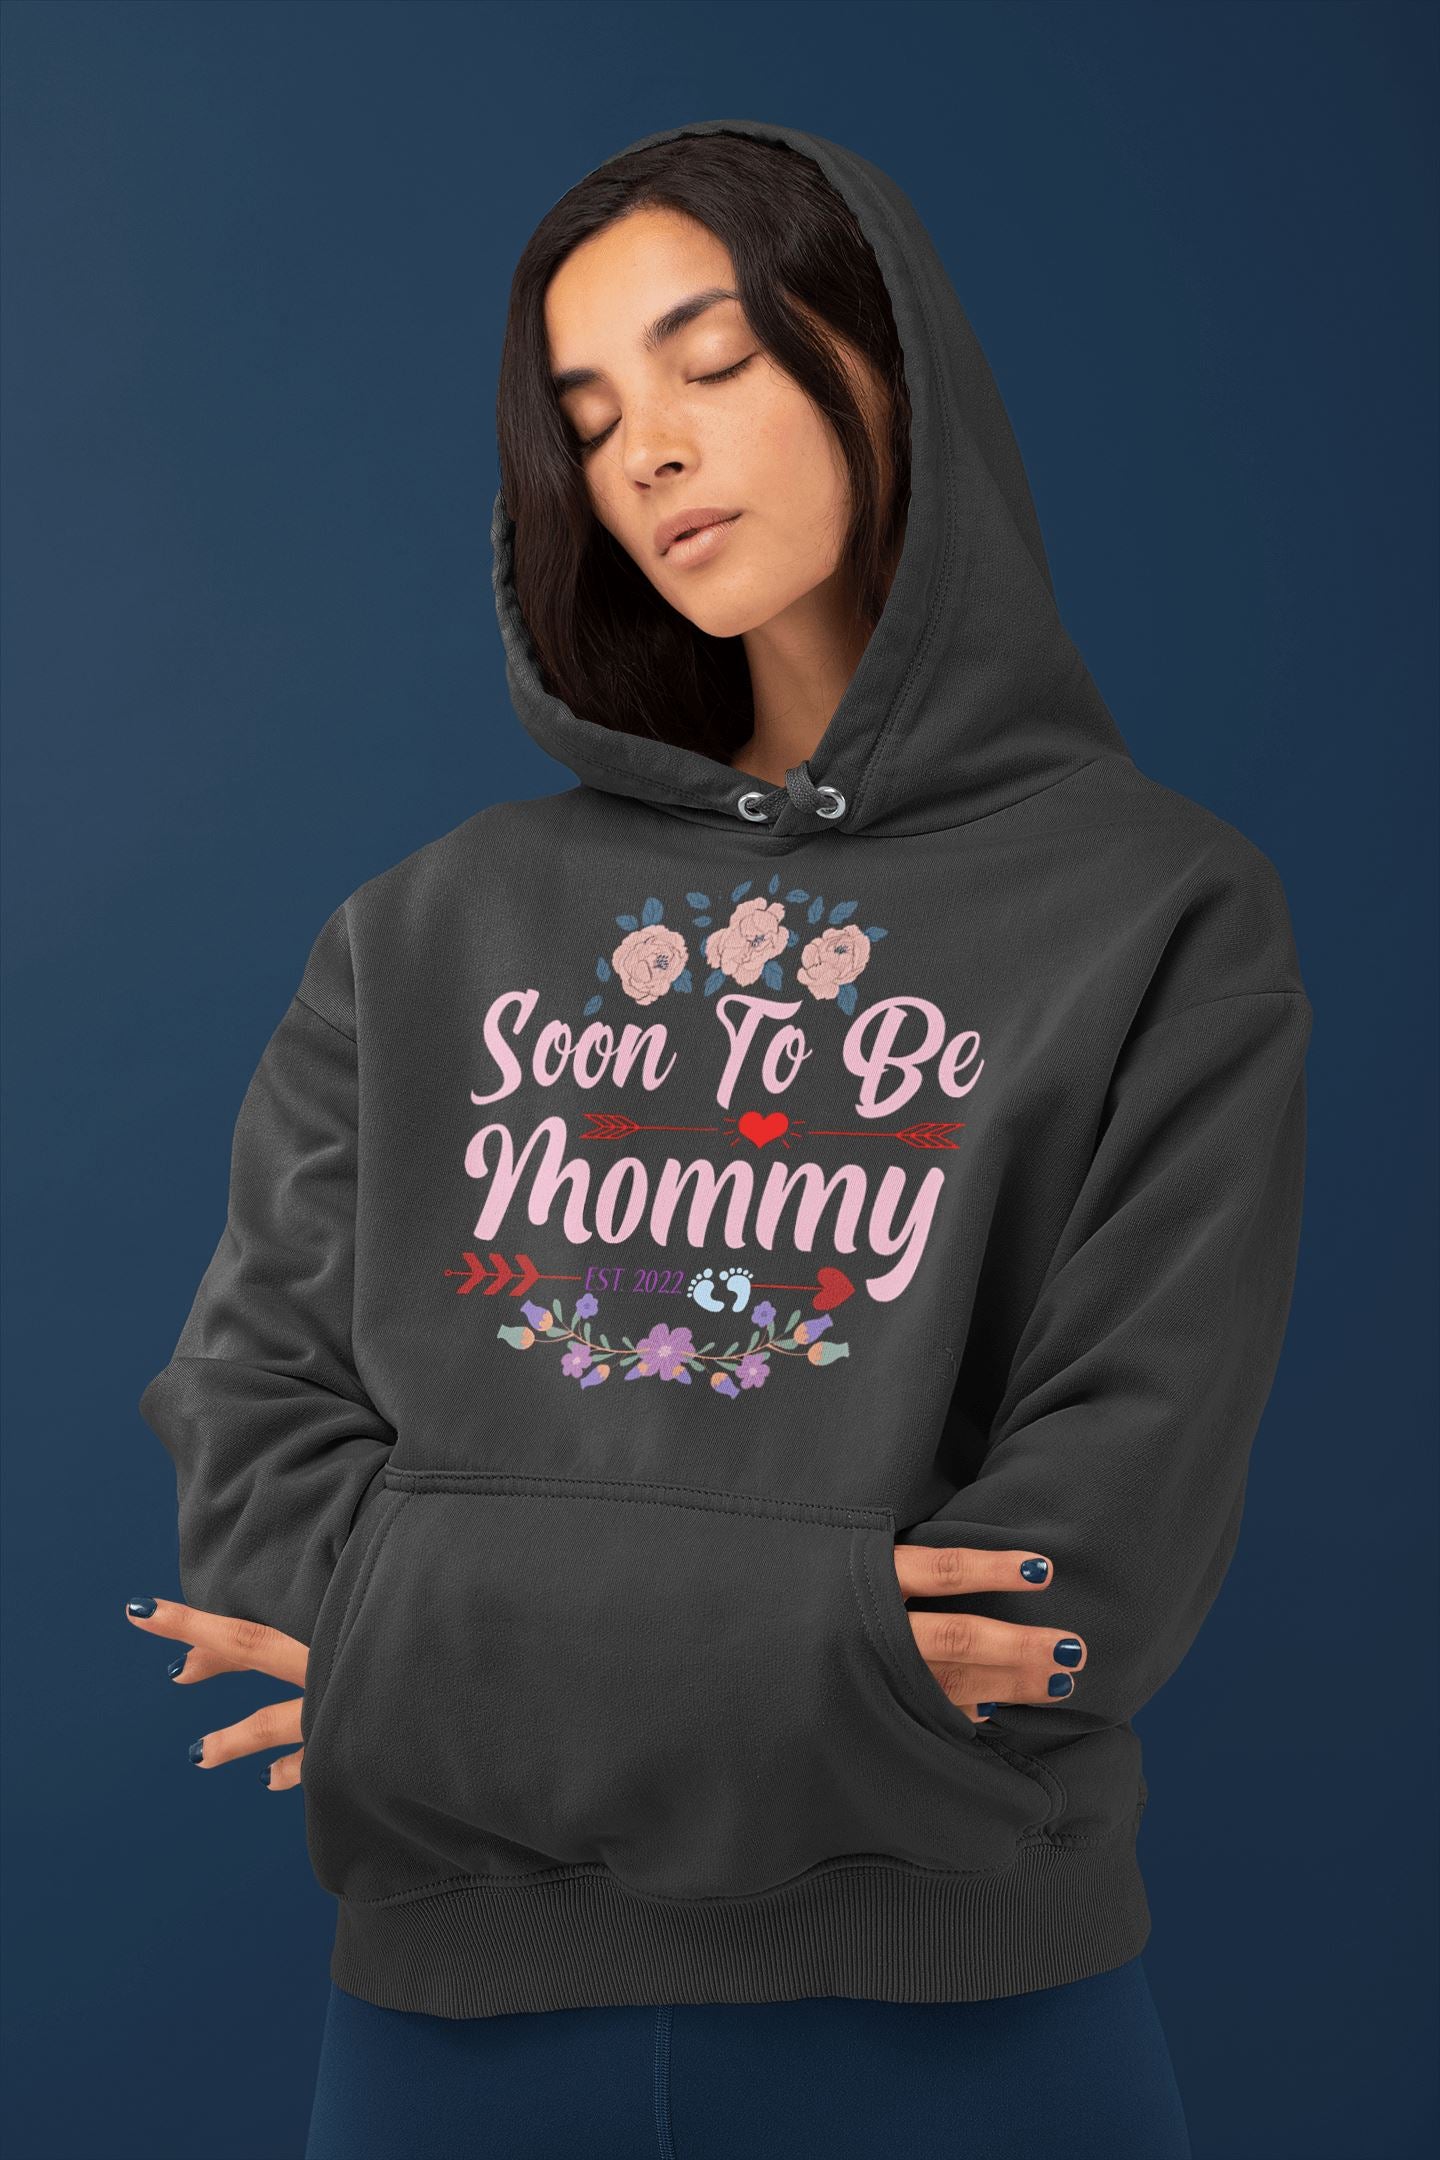 Soon to be Mommy Est. 2022 Special Black Hoodie for Women Printrove 